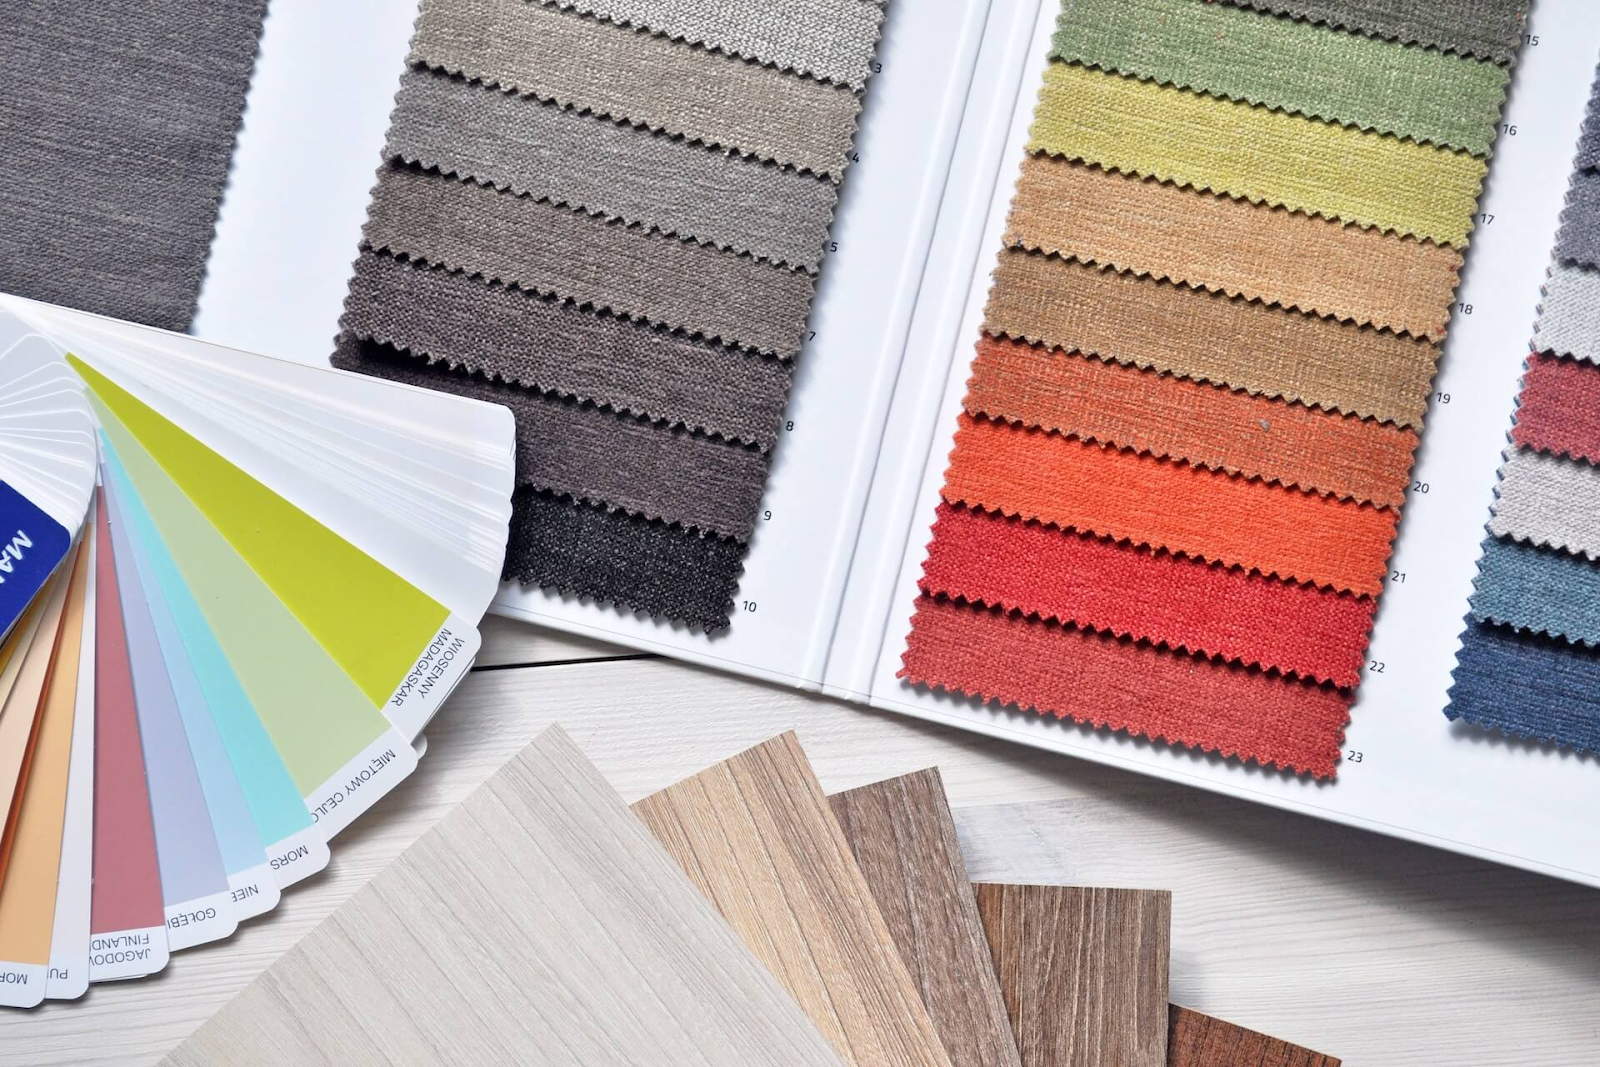 Interior design scholarships can help you pay for the cost of earning an interior design degree.